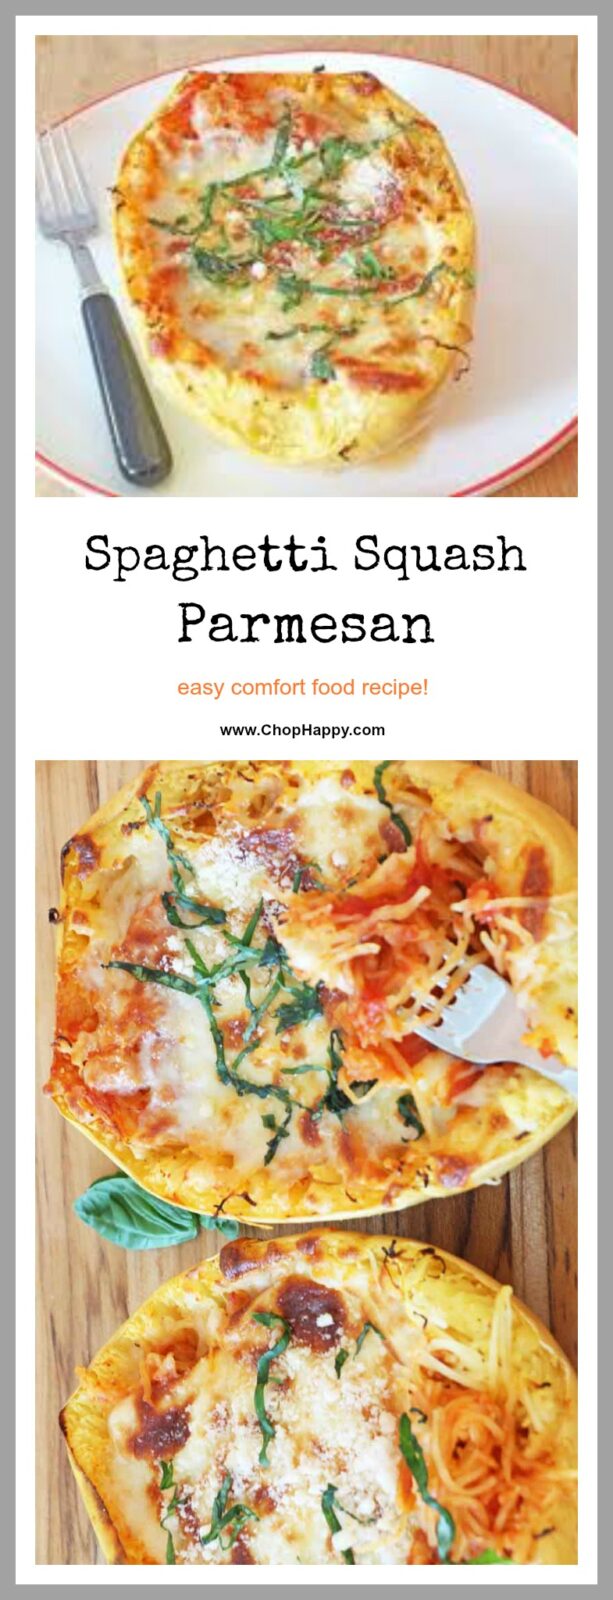 Spaghetti Squash Parmesan Recipe- comfort food hug that makes everyone smile each bite. This is so easy to make. Just sauce, parm cheese, mozzarella, spaghetti squash and spices. Get ready to make this your new favorite weeknight dinner. www.ChopHappy.com